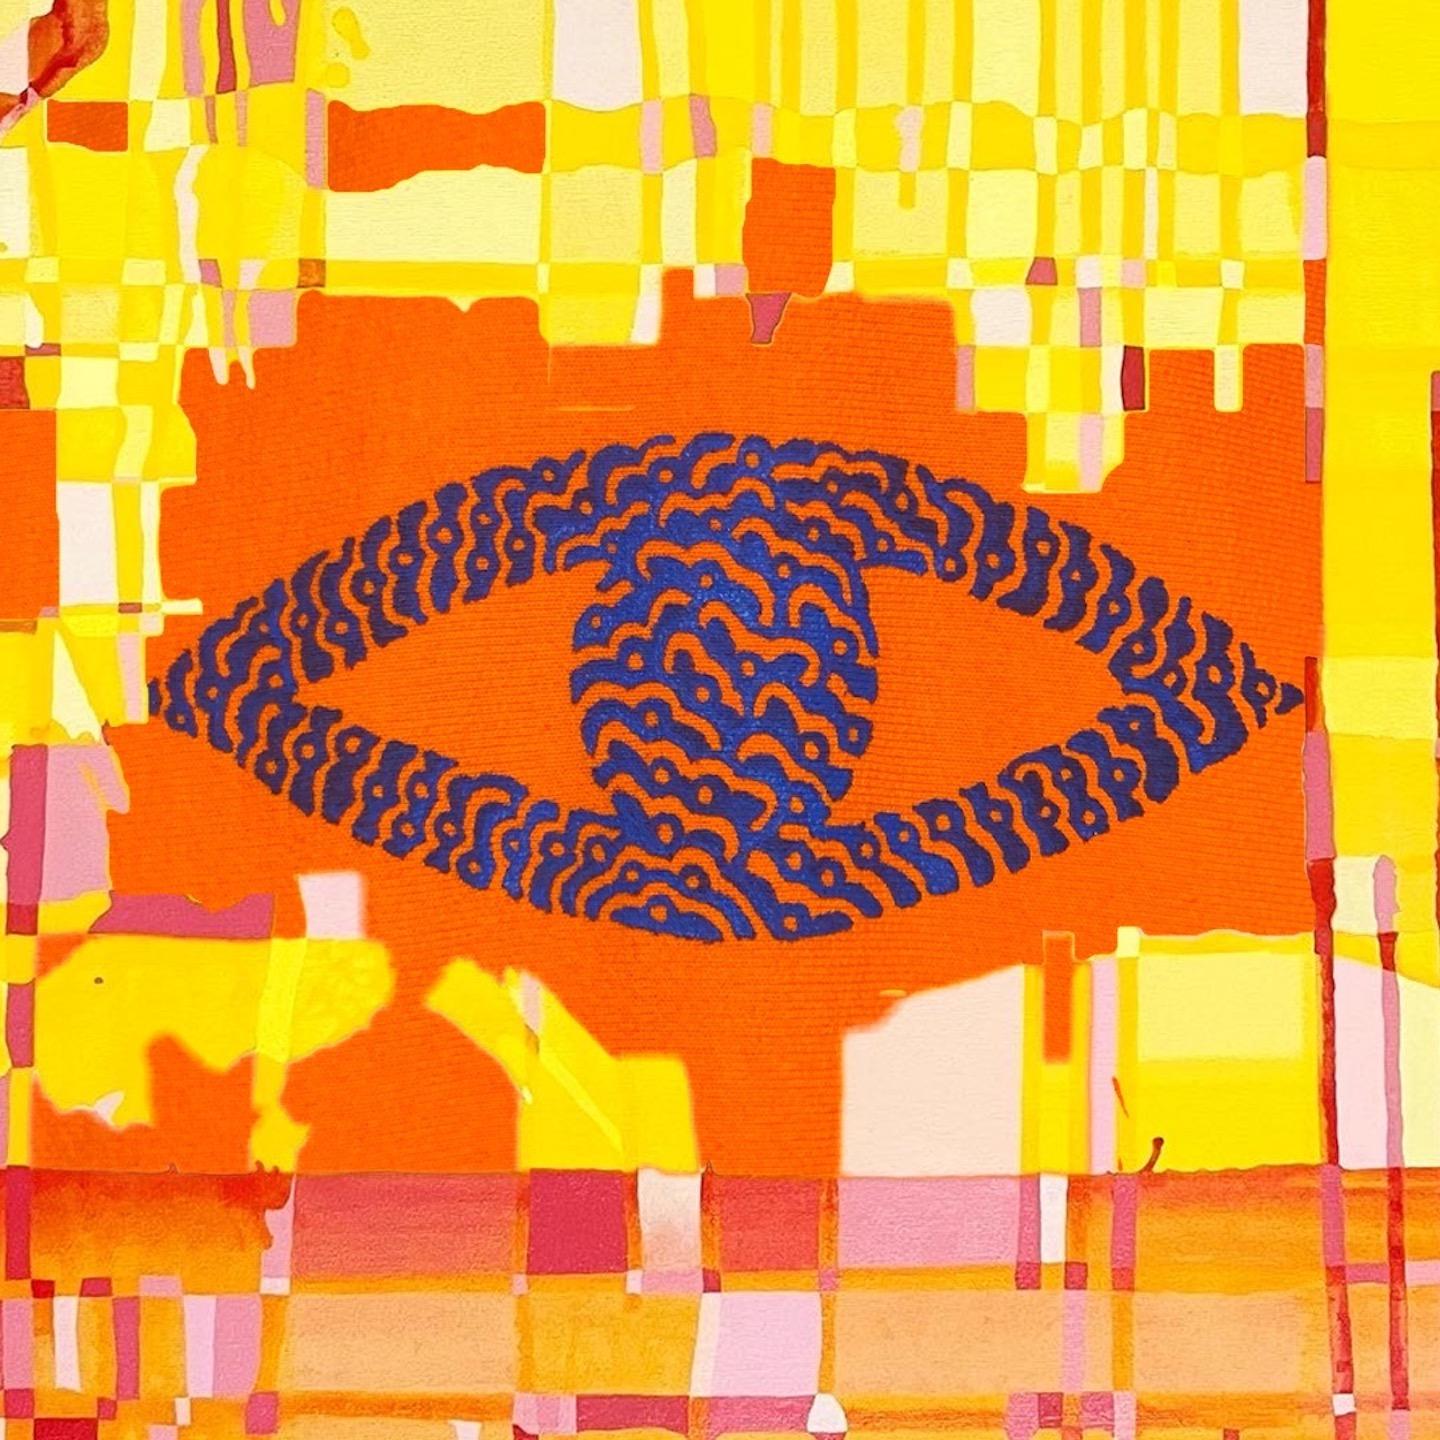 Curving blue fine-line work forming the shape of an eye set against an orange backdrop which is intertwined with a rigid, yet organic checkered grid of yellows, oranges and pinks.